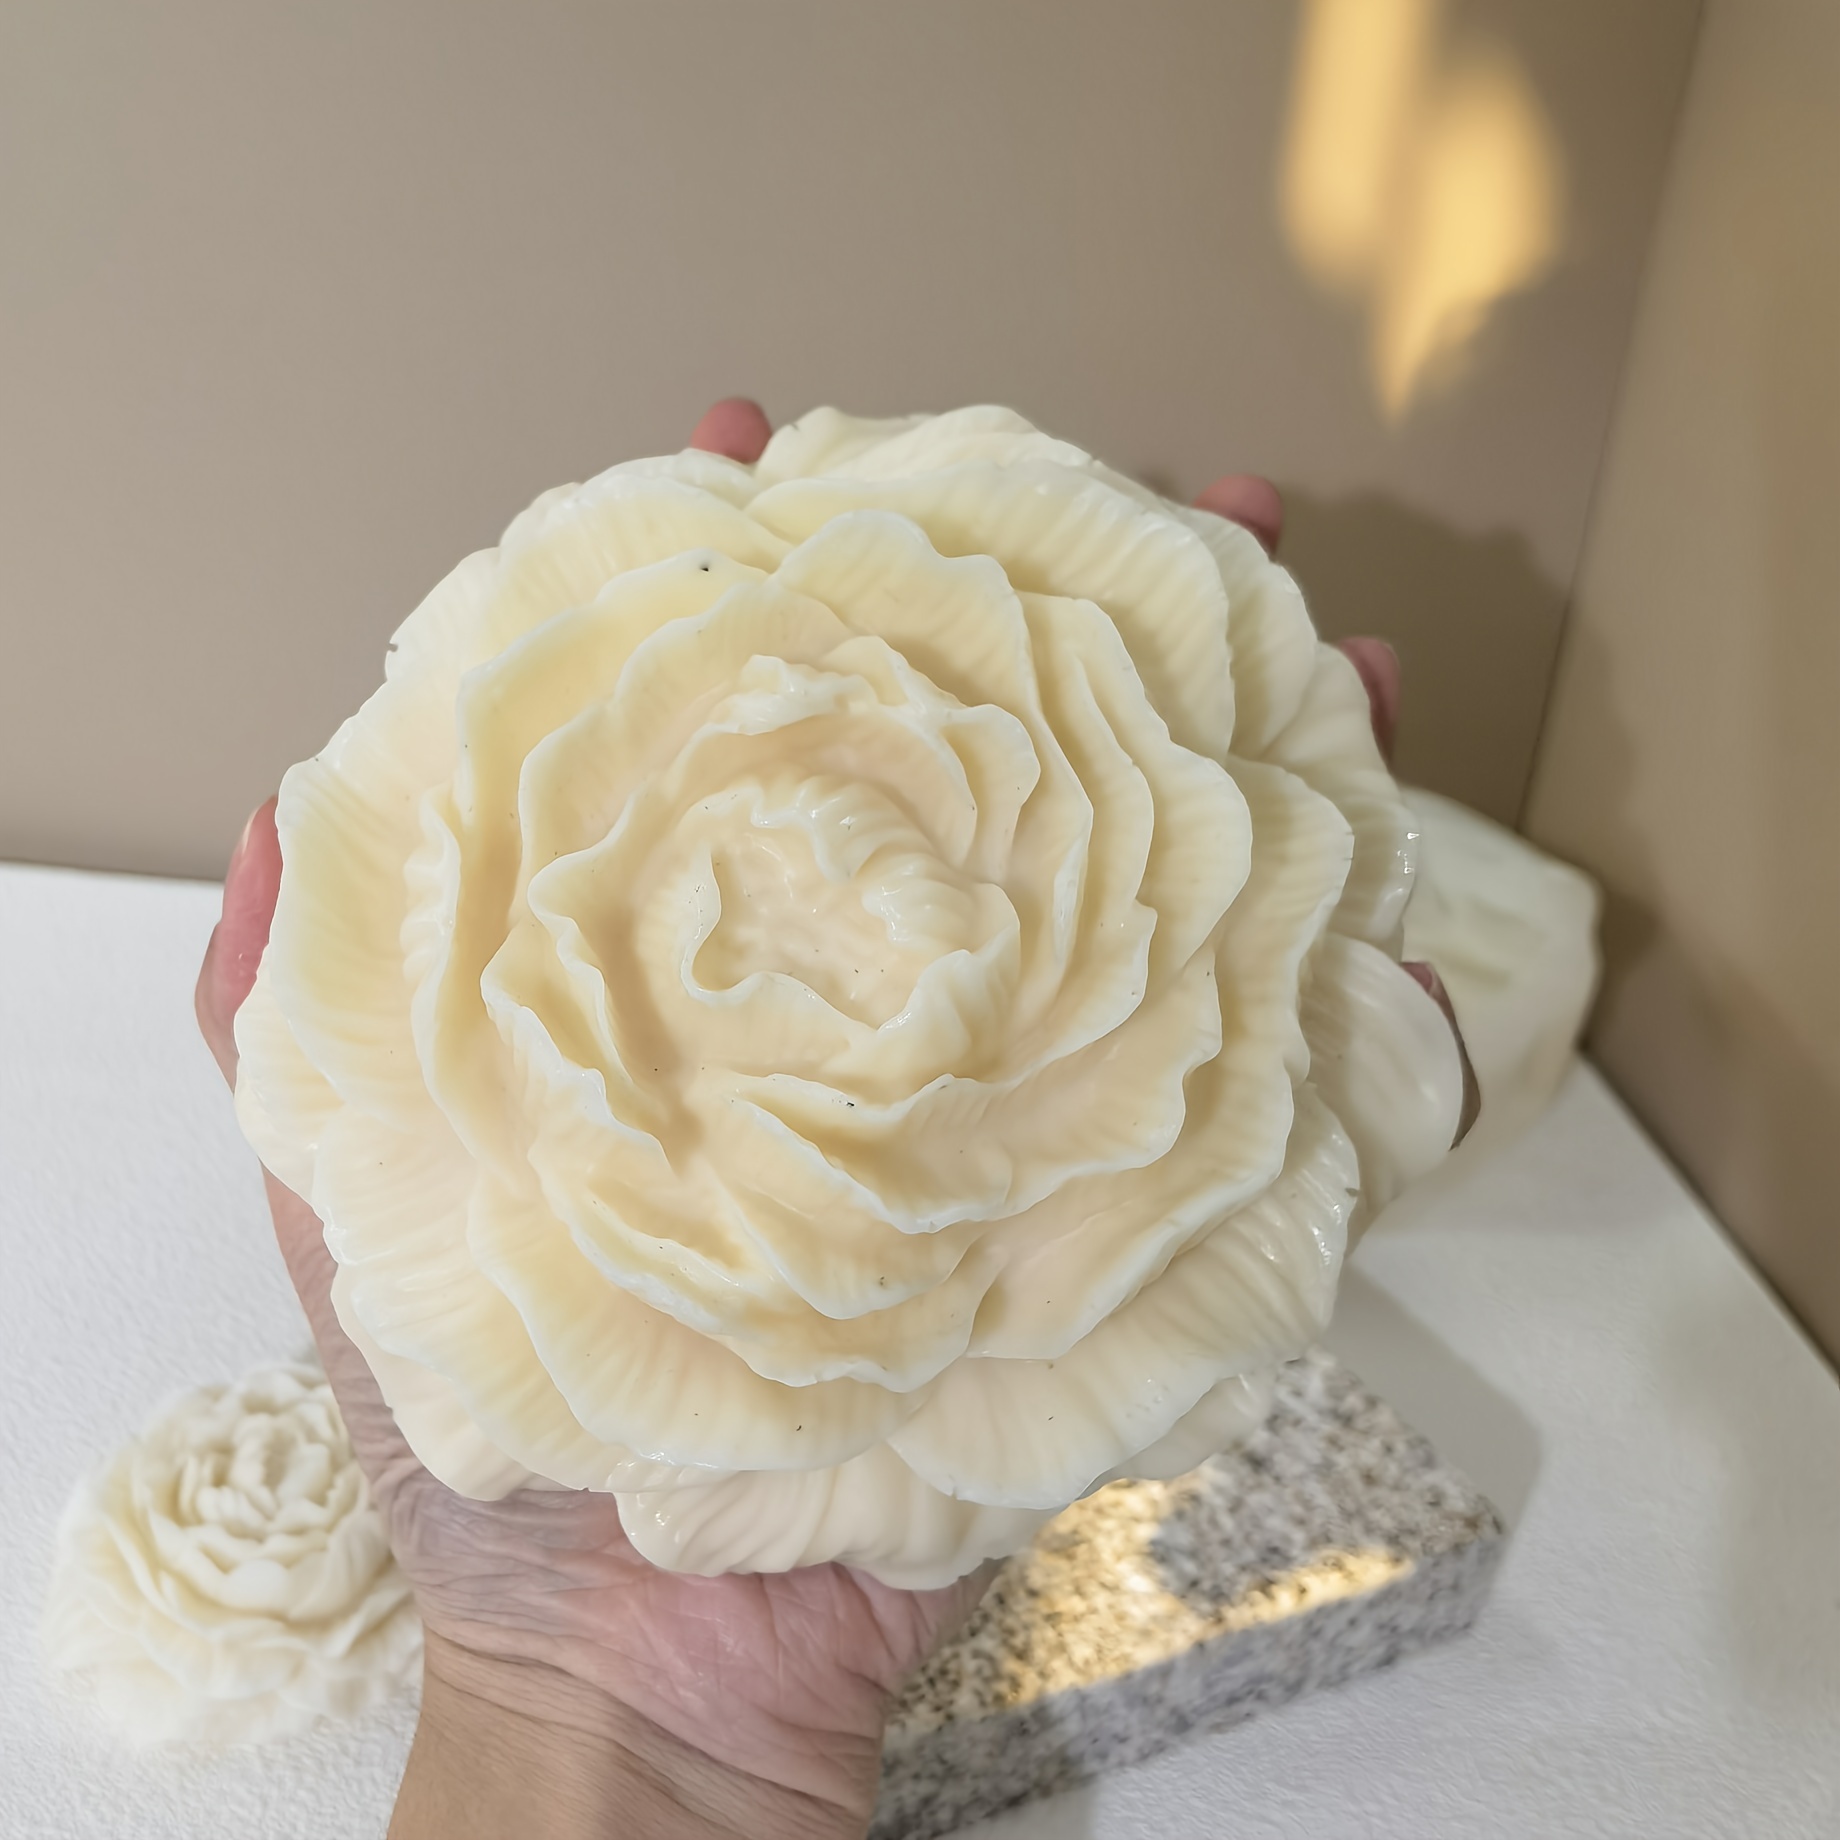 

Ruiswahs Large Huge 6 Inch Peony Flower, Silicone Mold, Can Be Used To Make Candles, Resin, Cement, Gypsum, Soap, Cakes, Ice Cubes, Chocolate, Handmade Diy Tools, Home Decoration Handicraft Molds